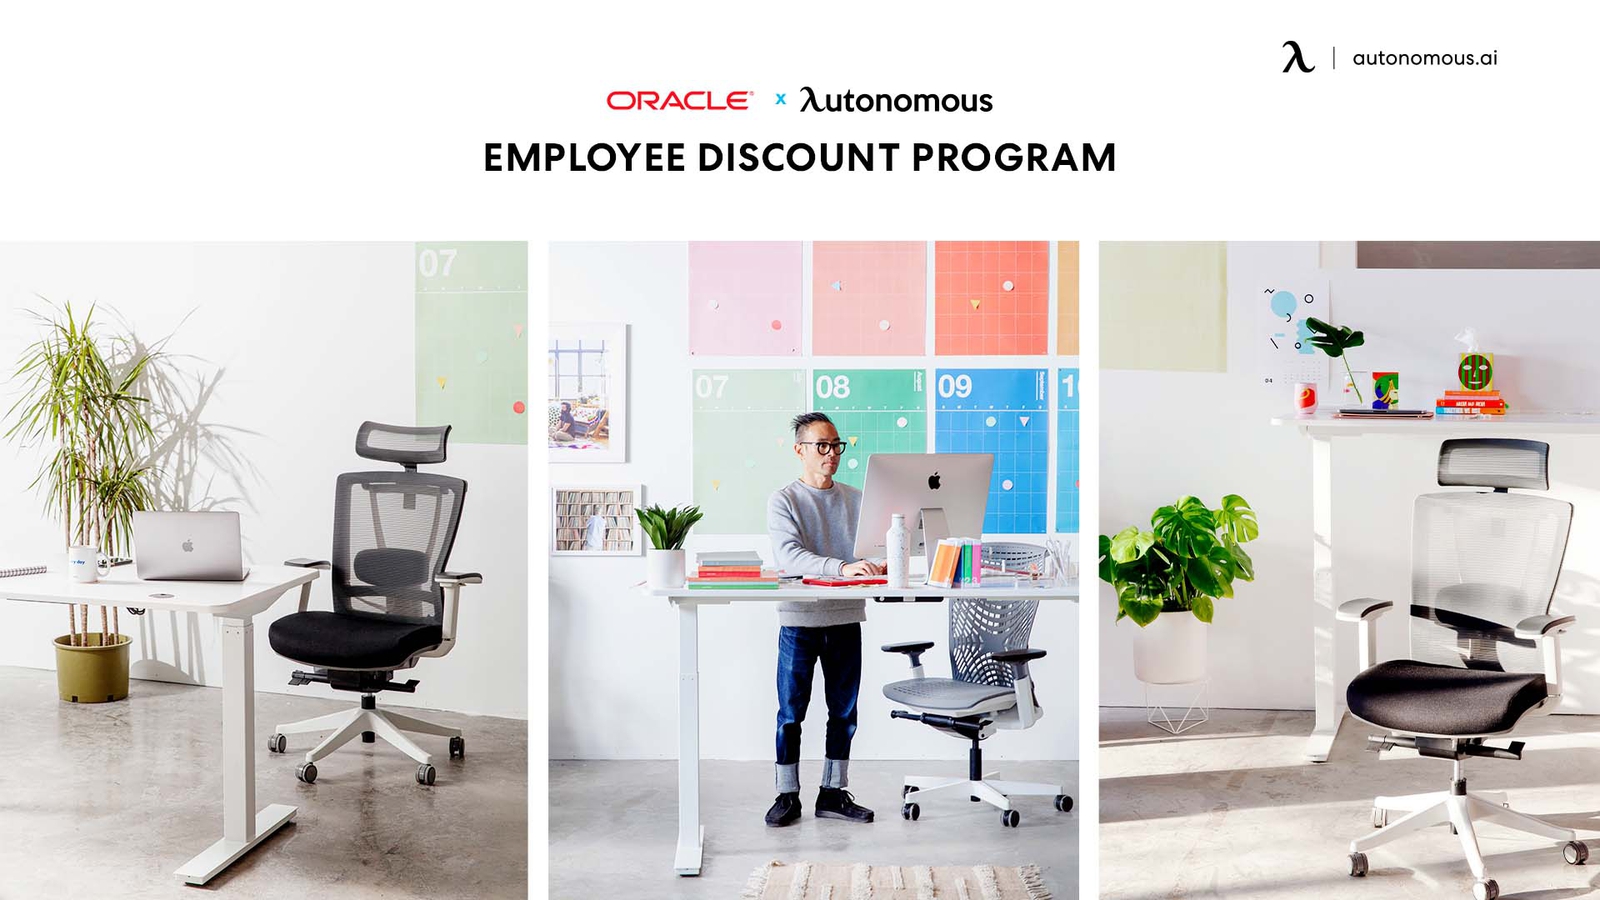 Oracle Employee Discounts on Office Furniture by Autonomous